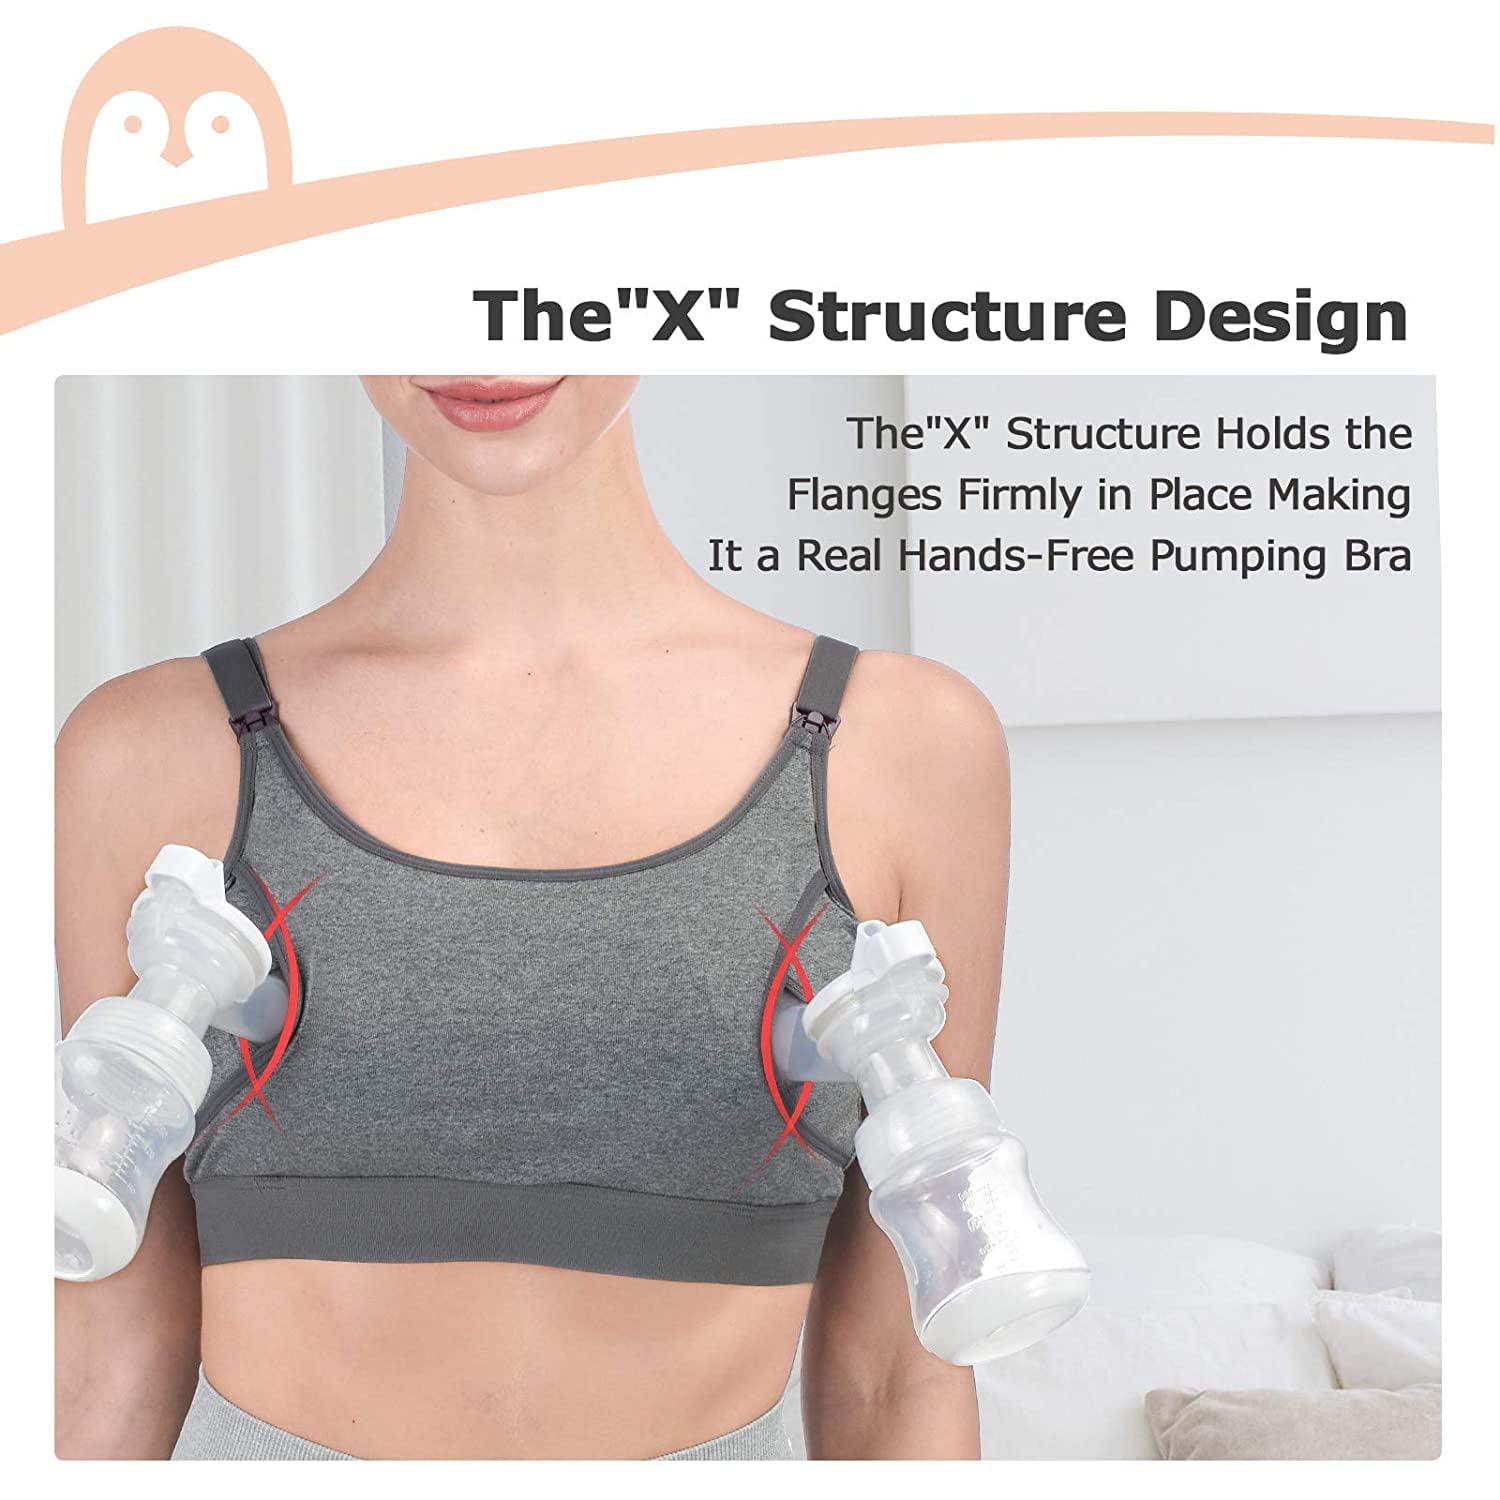 Hands-free Double Pumping Bra for Spectra, Medela and Hegen